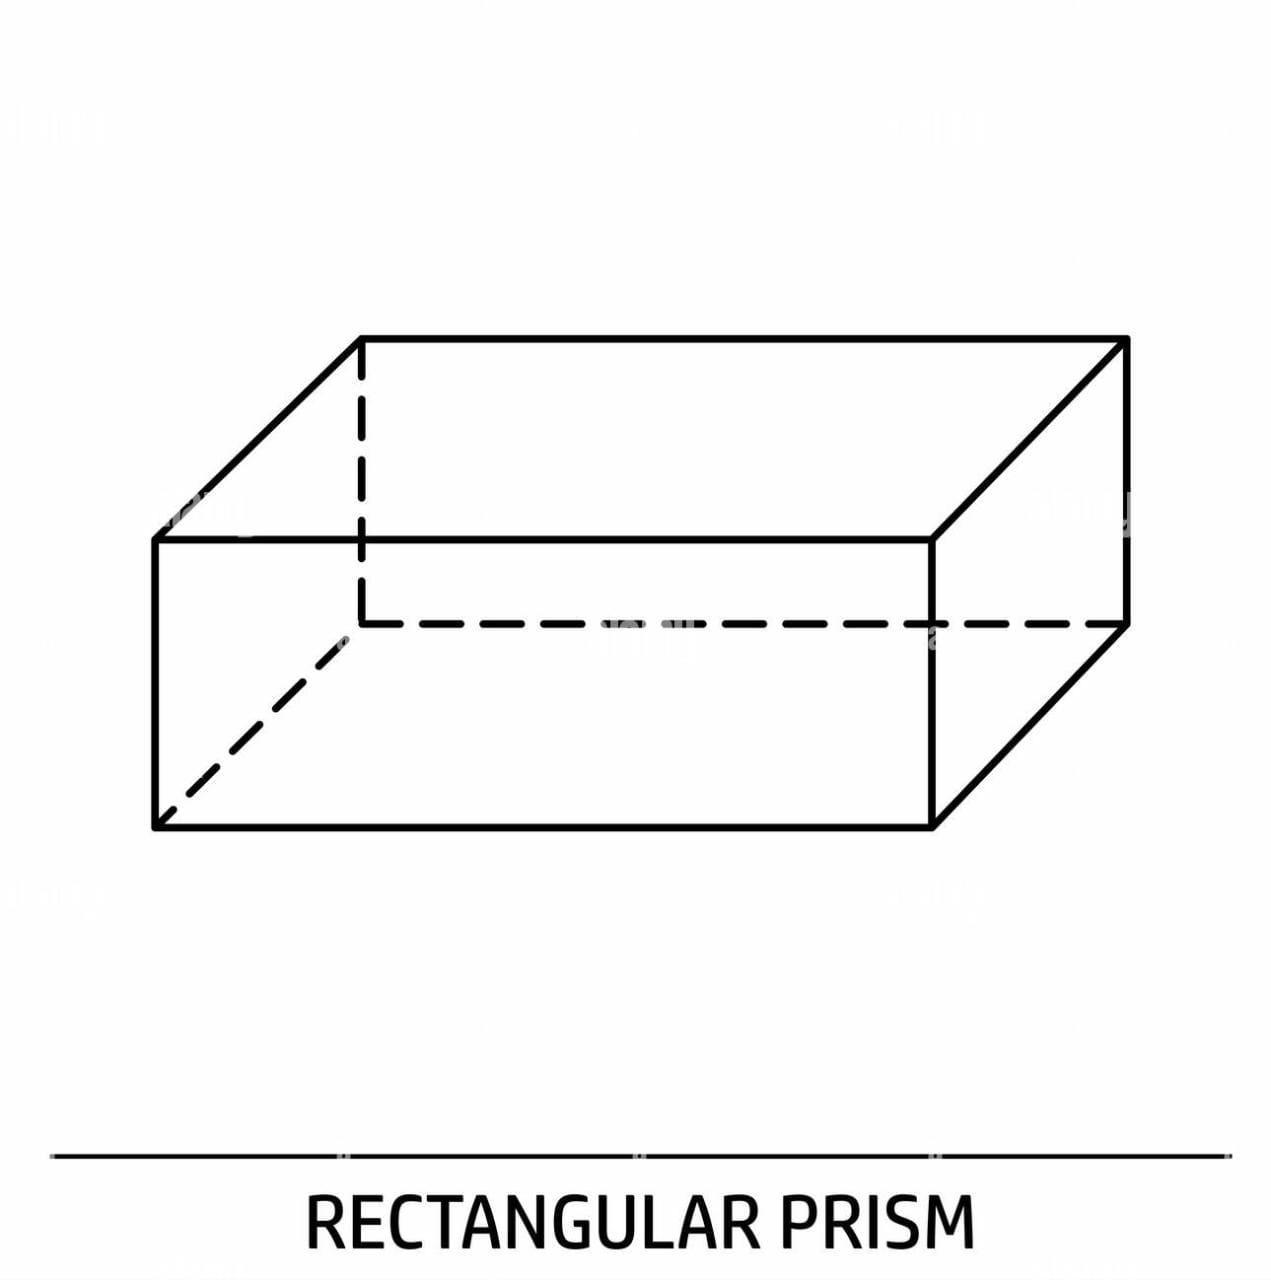 A Rectangular Prism Is Shown In The Image.A Rectangular Prism With Dimensions Of 5 Yards By 5 Yards By